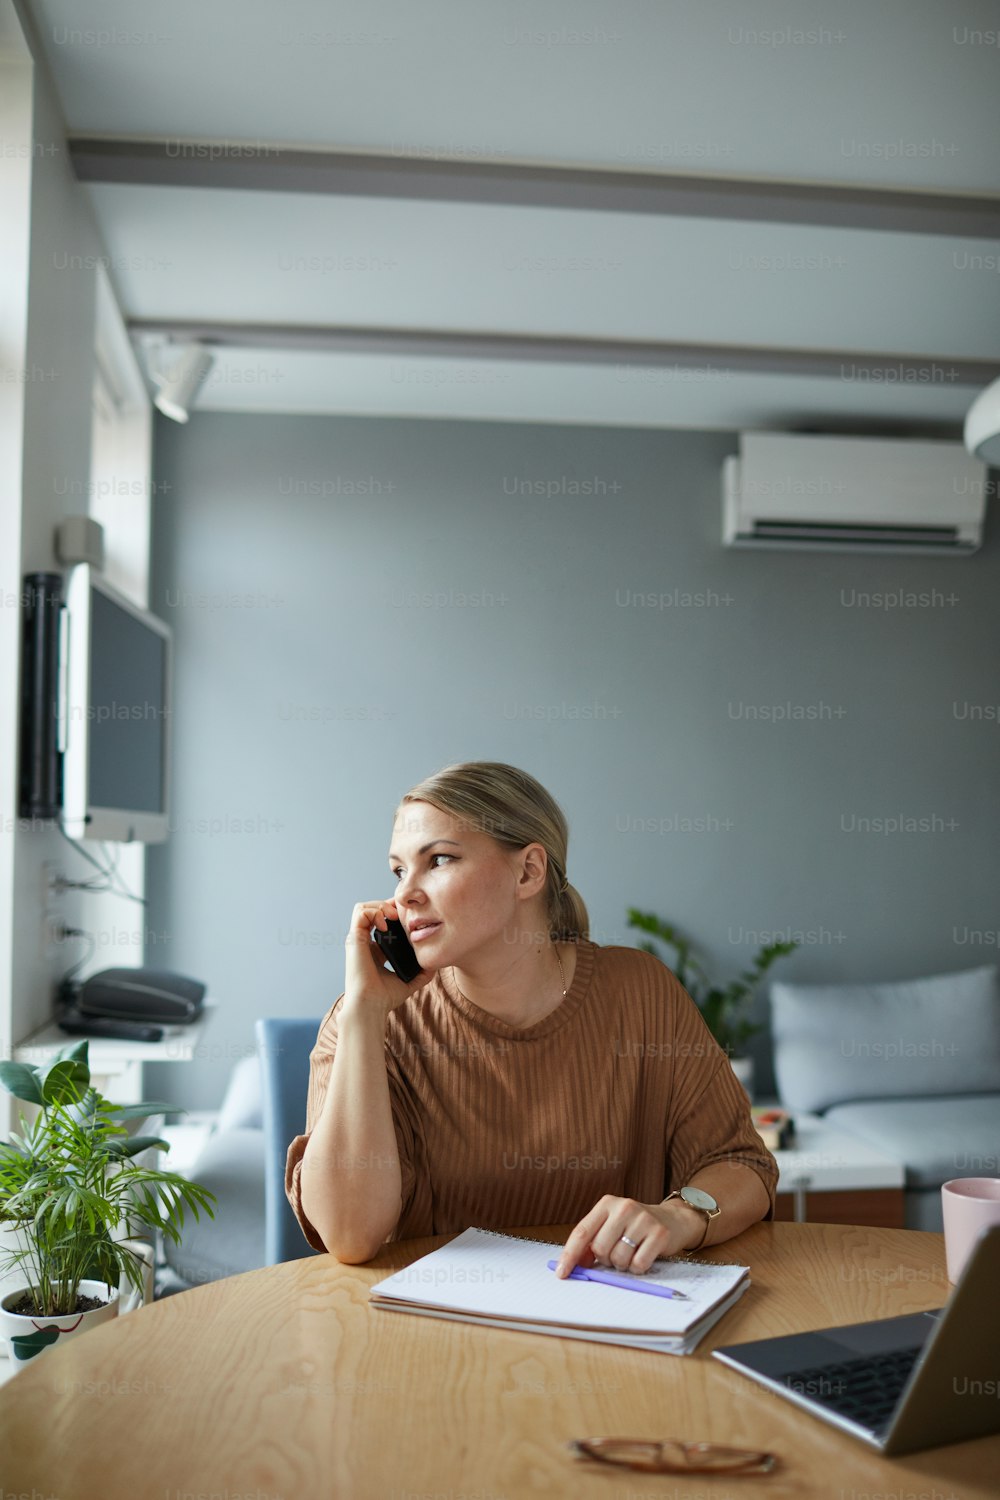 Vertical portrait of young Caucasian woman speaking on phone while working or studying at home in apartment with minimal decor